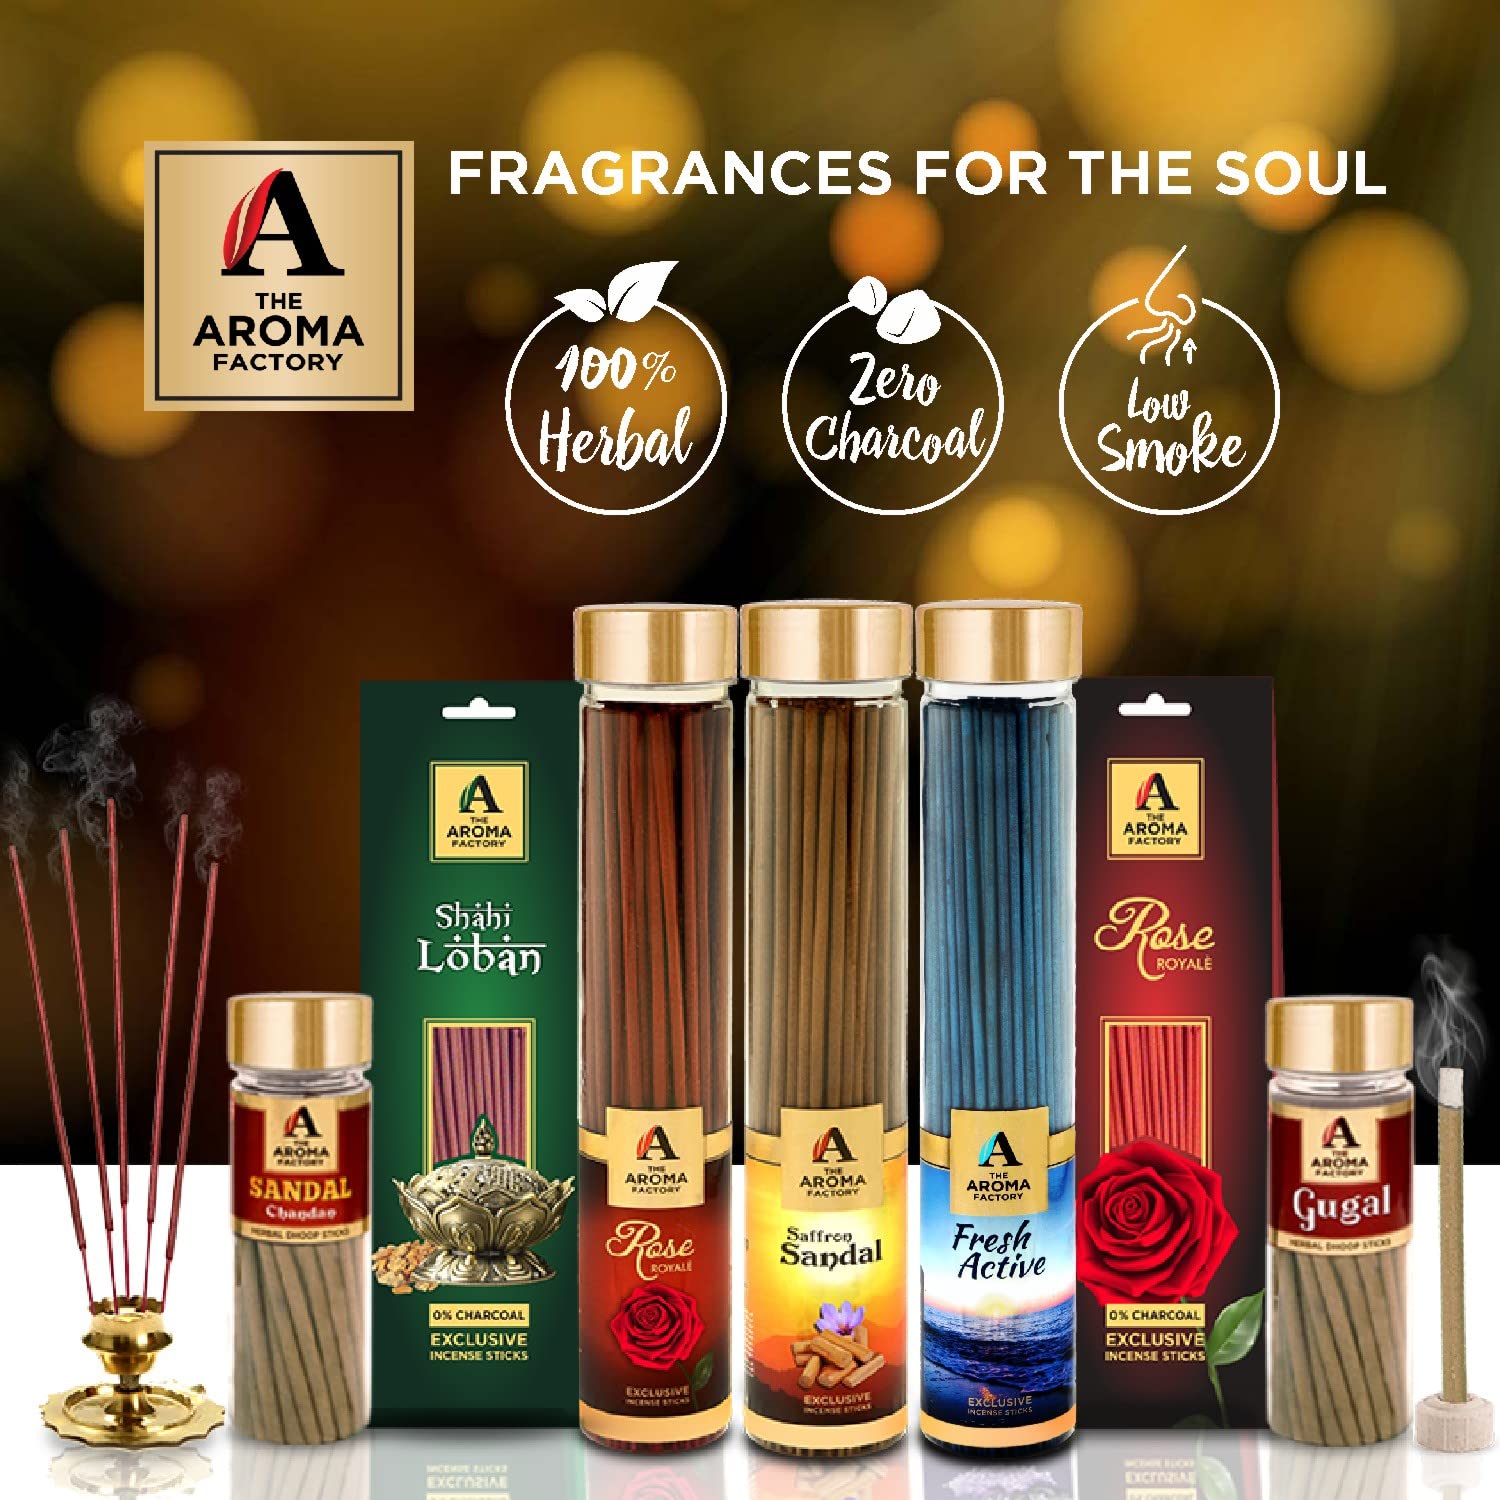 The Aroma Factory Power of Woods Incense Sticks, Low Smoke & Zero Charcoal, Luxury Agarbatti for Pooja, Home, Meditation (Bottle Pack of 1, 100g)